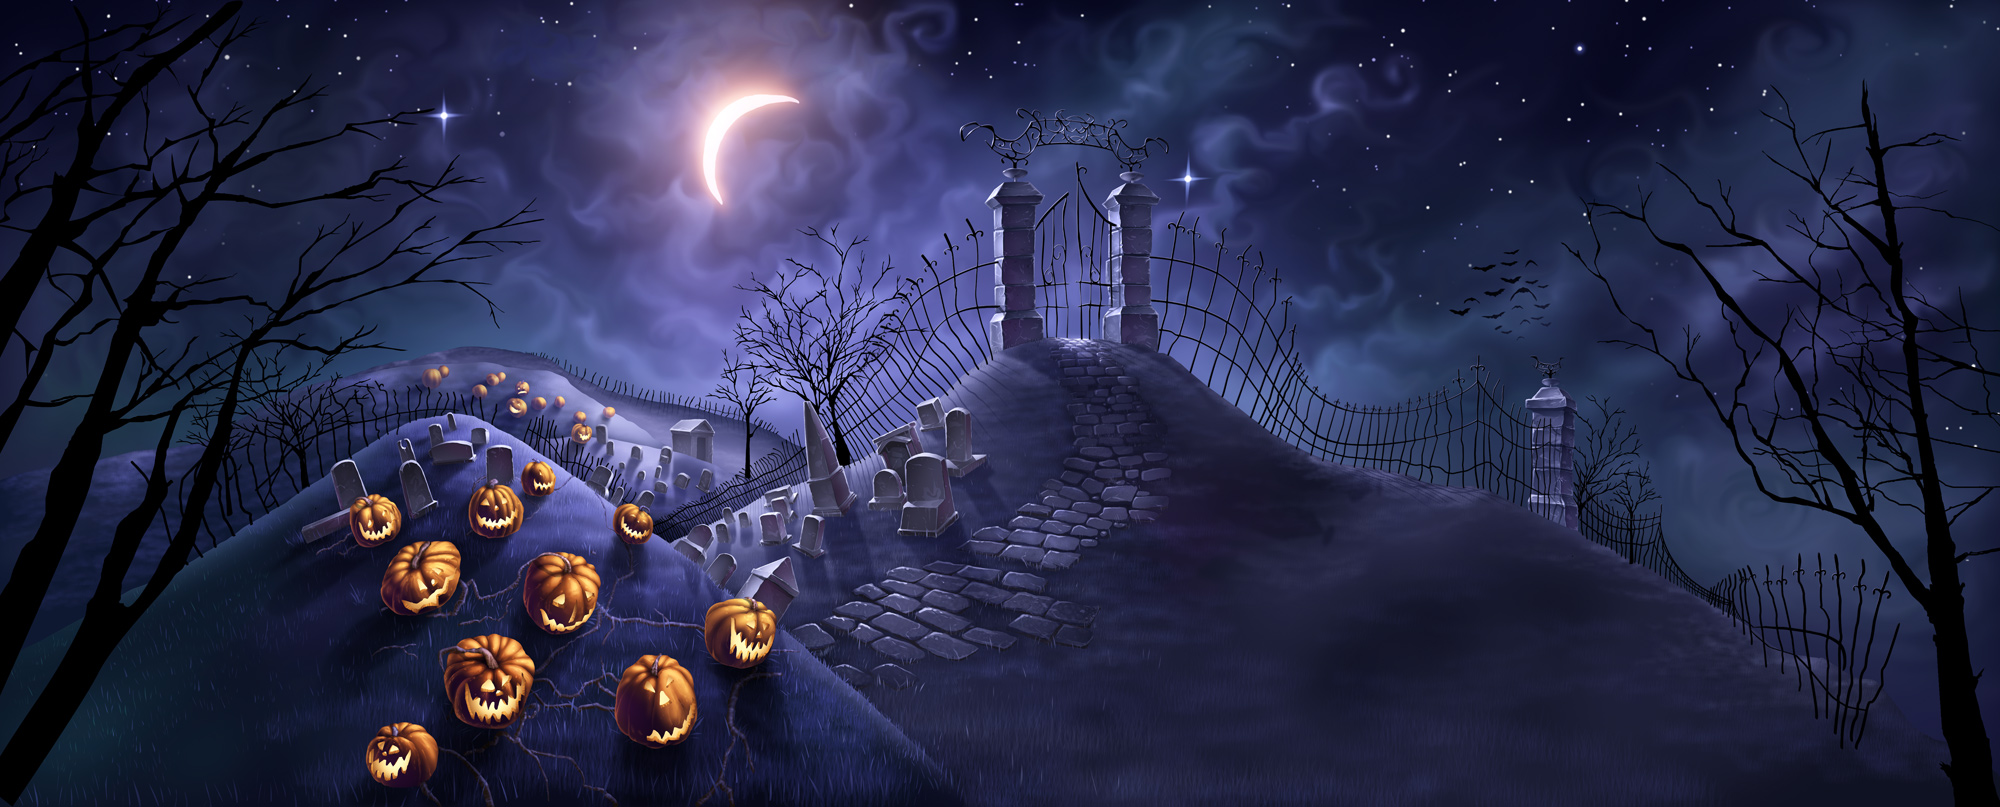 background halloween images #7